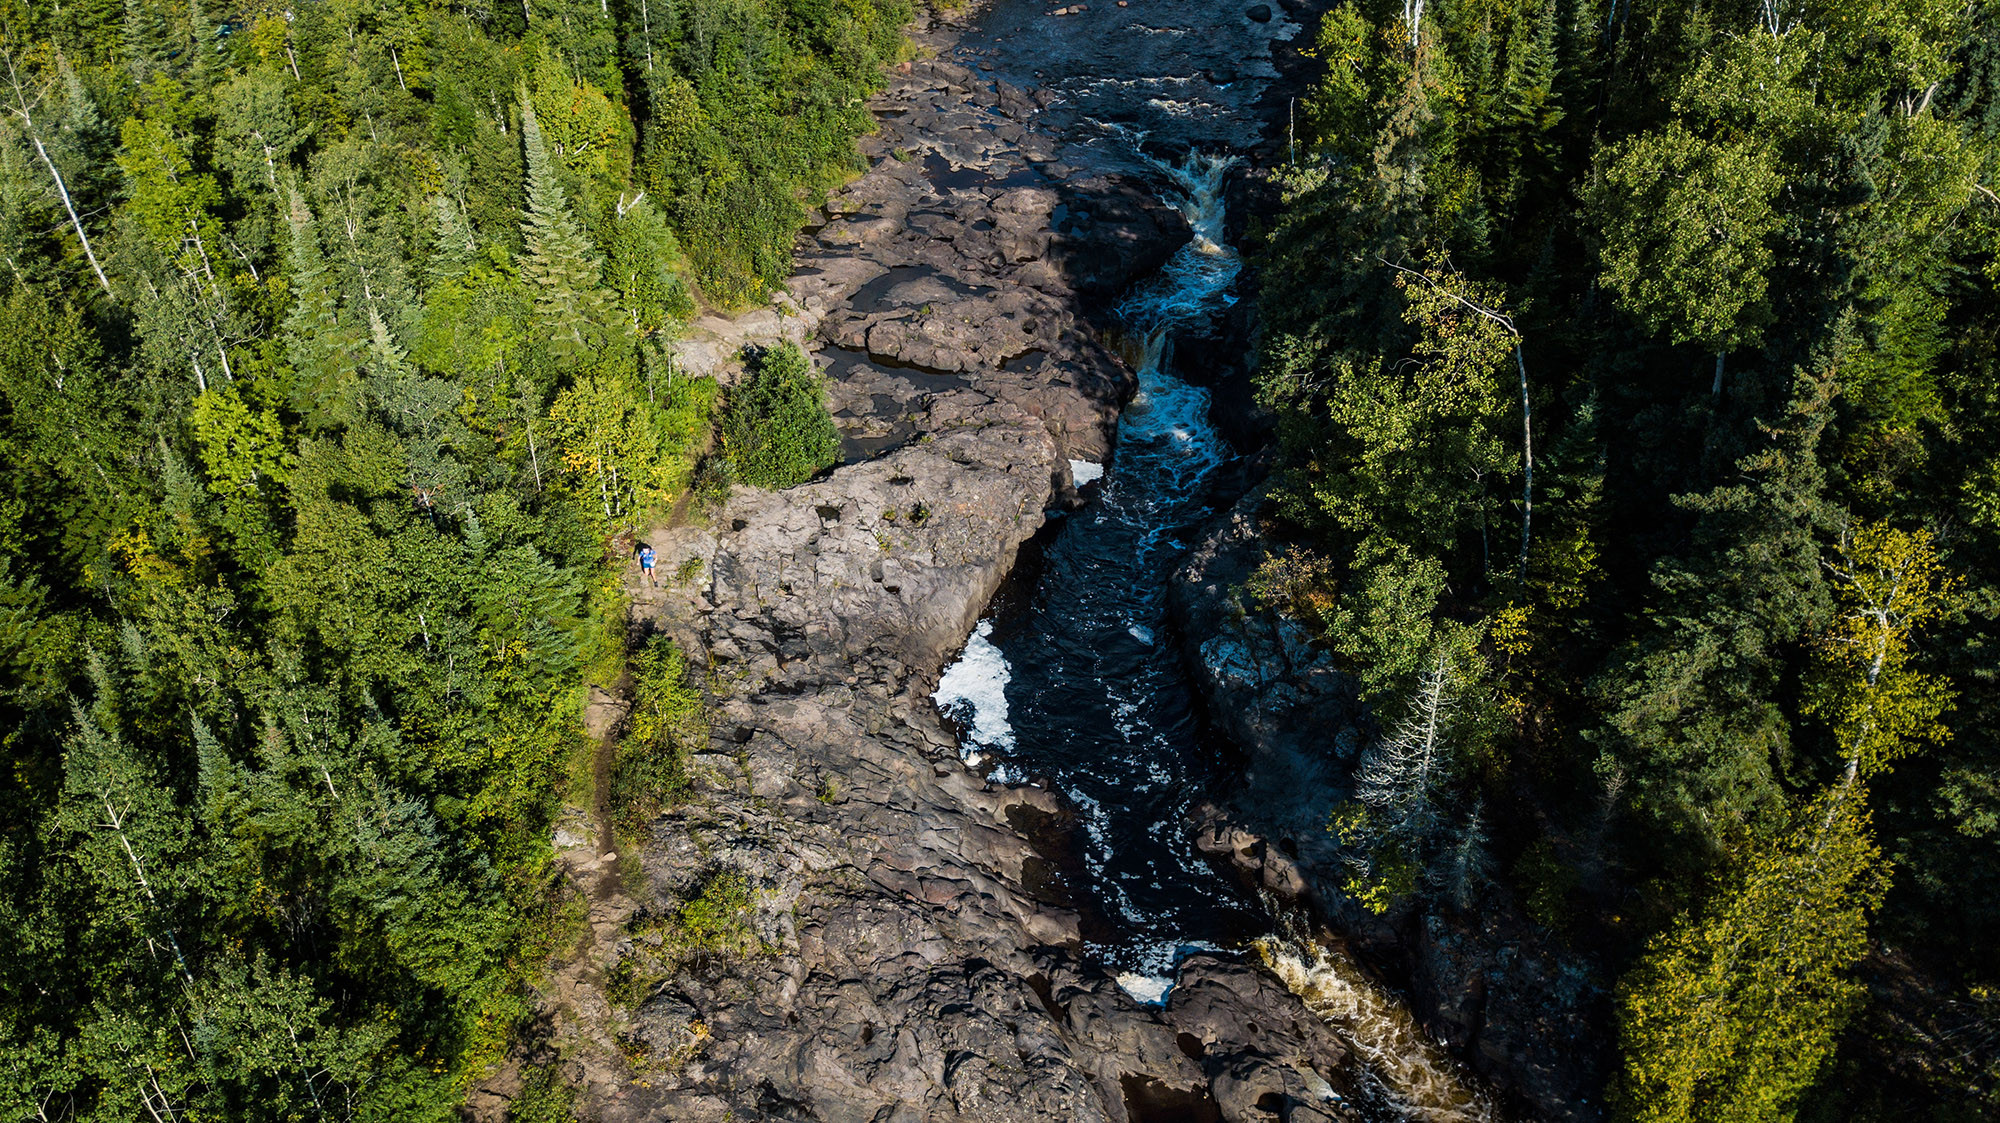 Temperance River From Above - Photo Credit Fresh Tracks Media